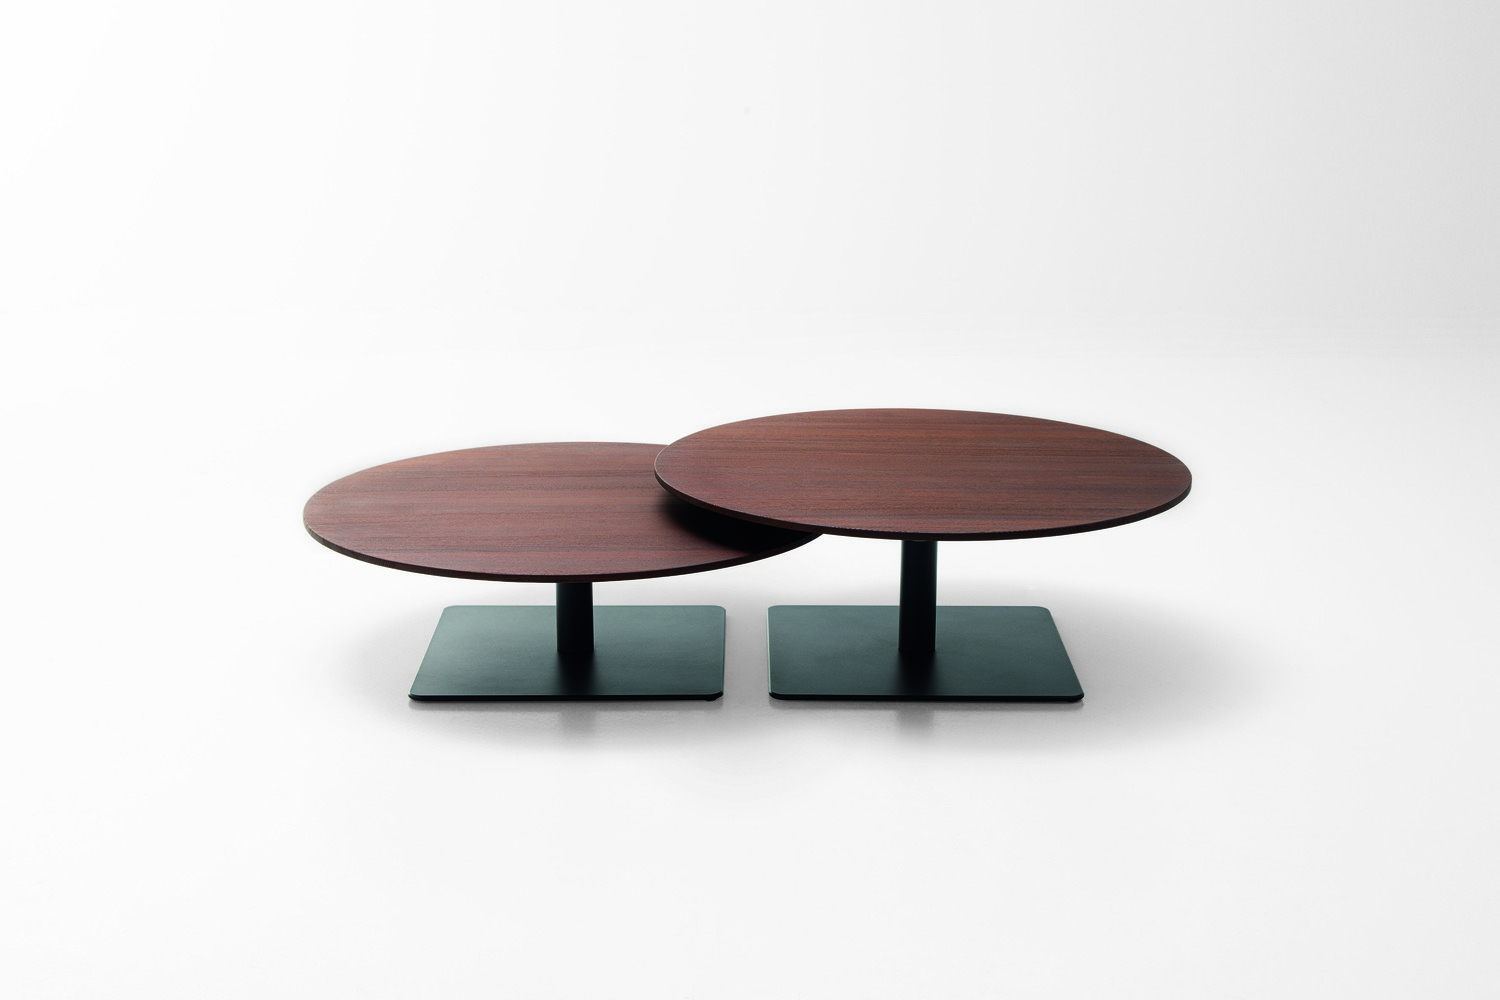 Tables and side tables with adjustable top. The base is made of aluminum, matt varnished in avorio or grafite color, and is provided with a stainless-steel warm gear for height regulation. The top is available in a wide range of exclusive materials, such as lightened concrete, Luce, Glaze, painted stoneware, Aurea Optima heartwood, Graniglia, Lias, stoneware with hand-made glass décor and Cristal. With this last top only, the base is available gloss-varnished in all the colors in the collection. © PAOLA LENTI SRL/SERGIO CHIMENTI